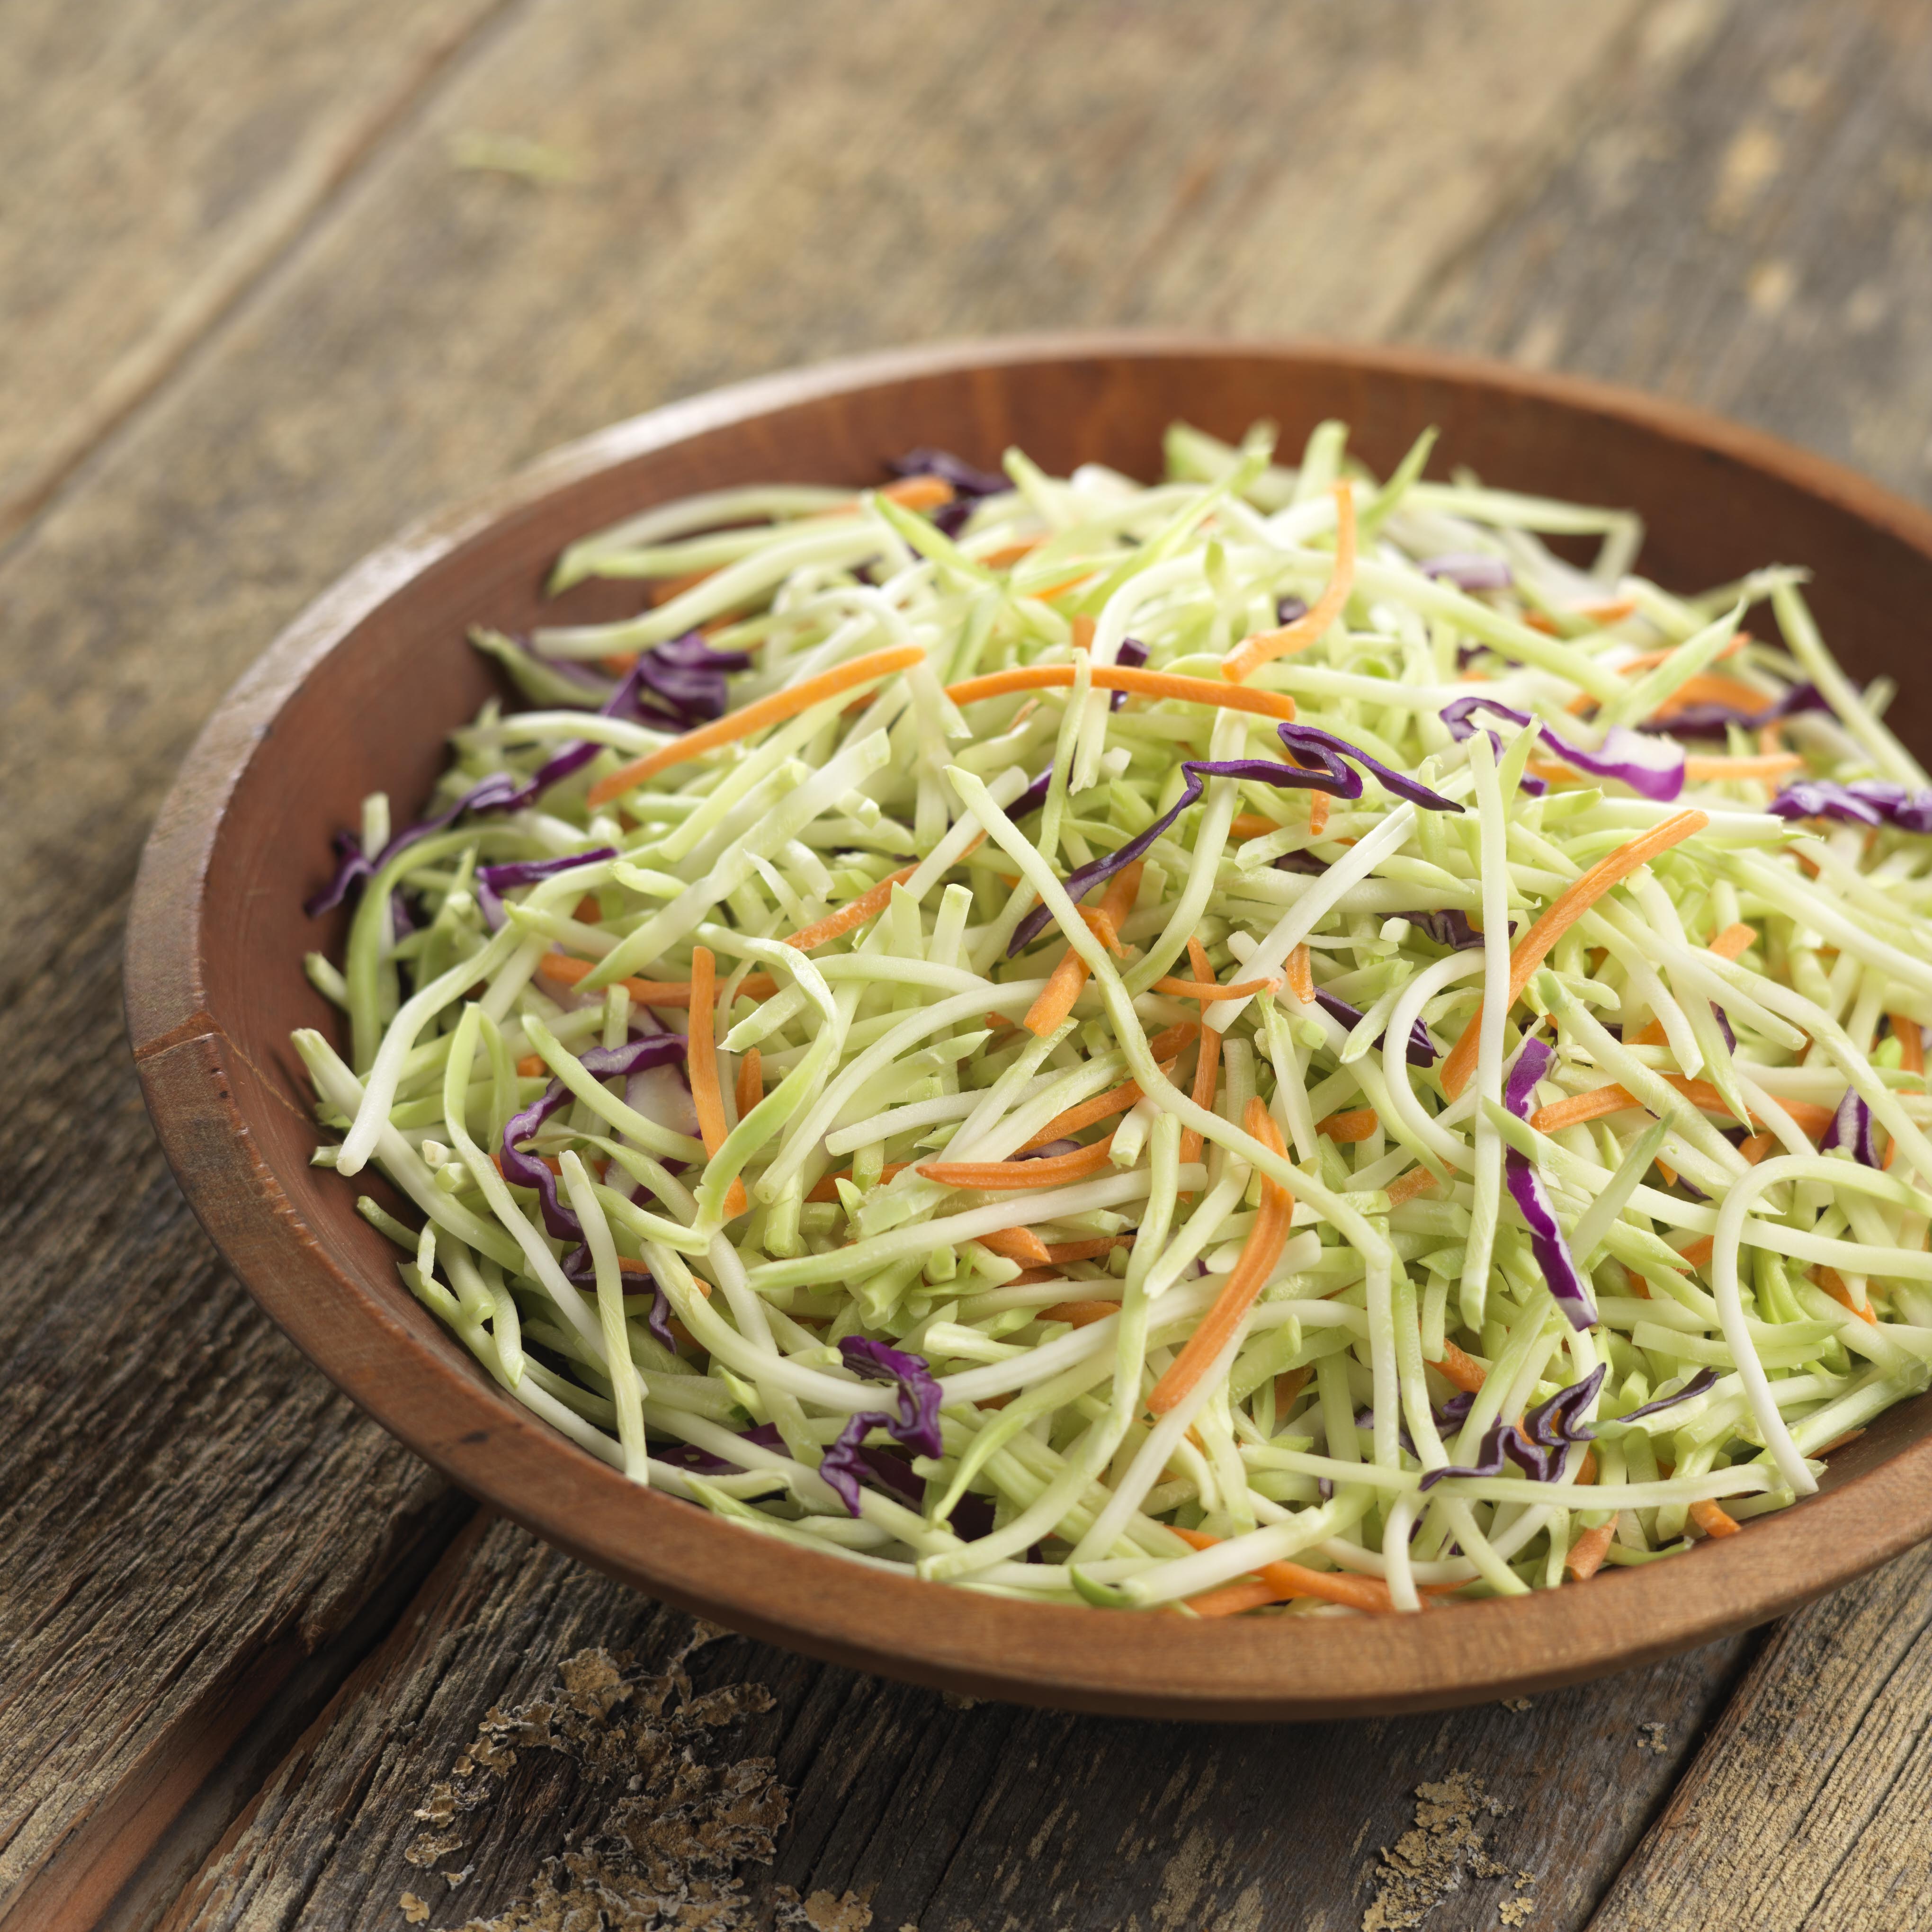 “Broccoli Slaw: The Crunchy Superfood Delight Taking Healthy Eating by Storm!”